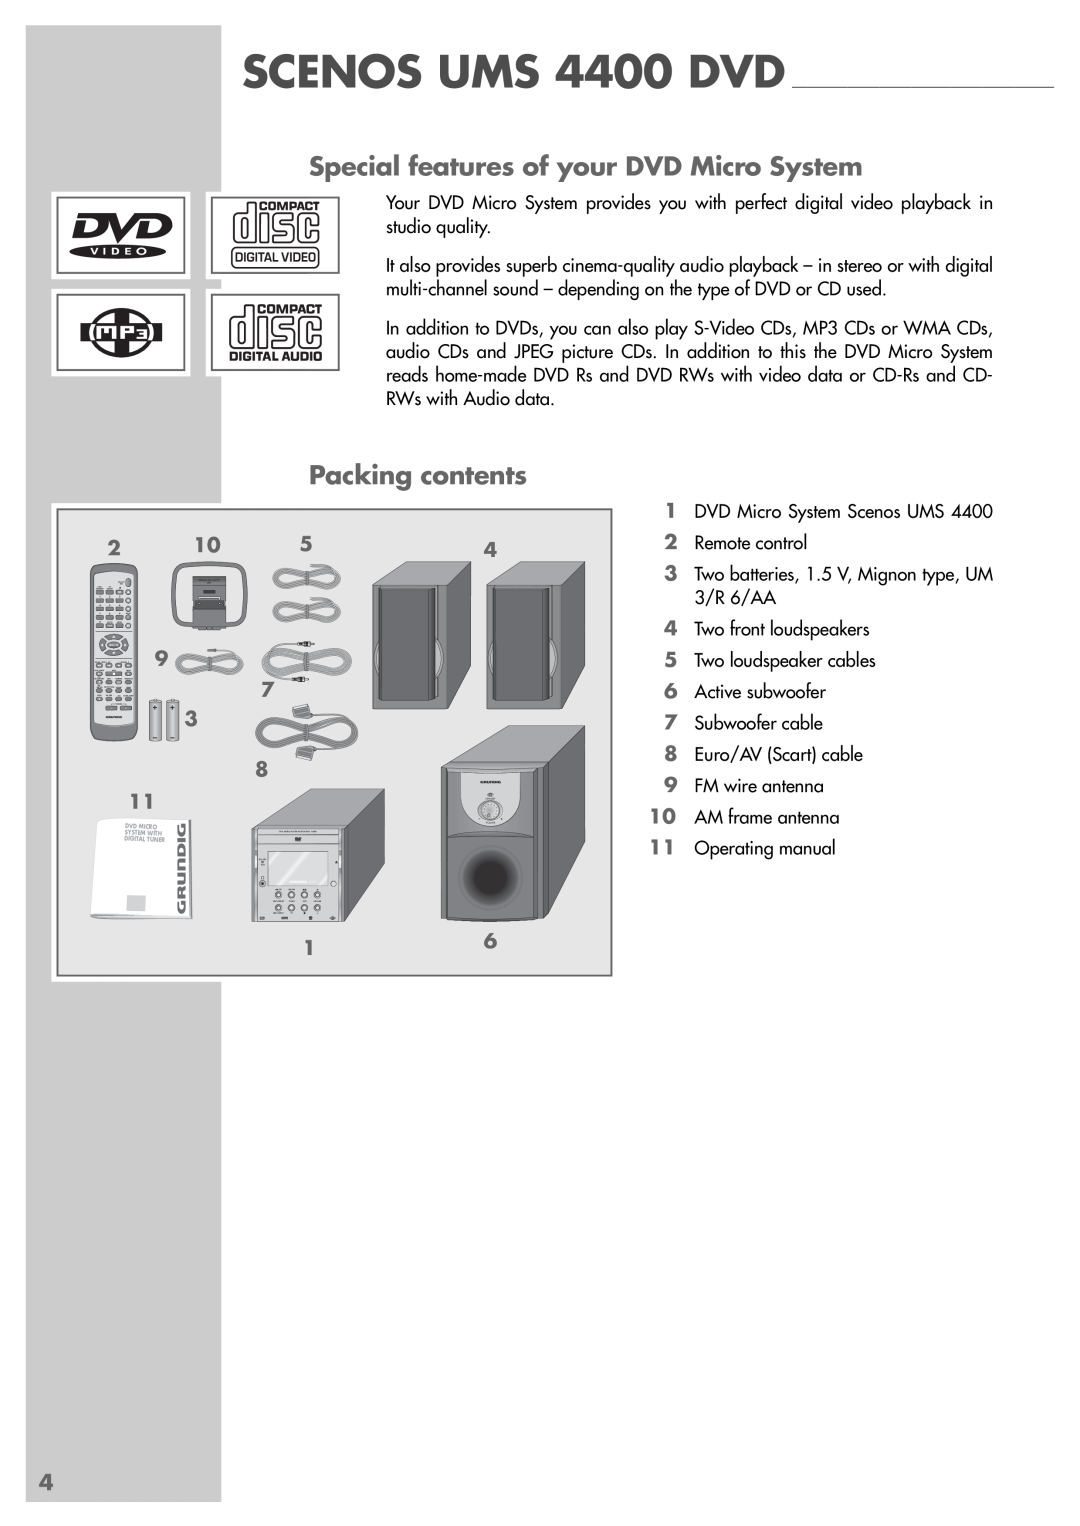 Grundig Scenos UMS 4400 DVD manual Special features of your DVD Micro System, Packing contents 